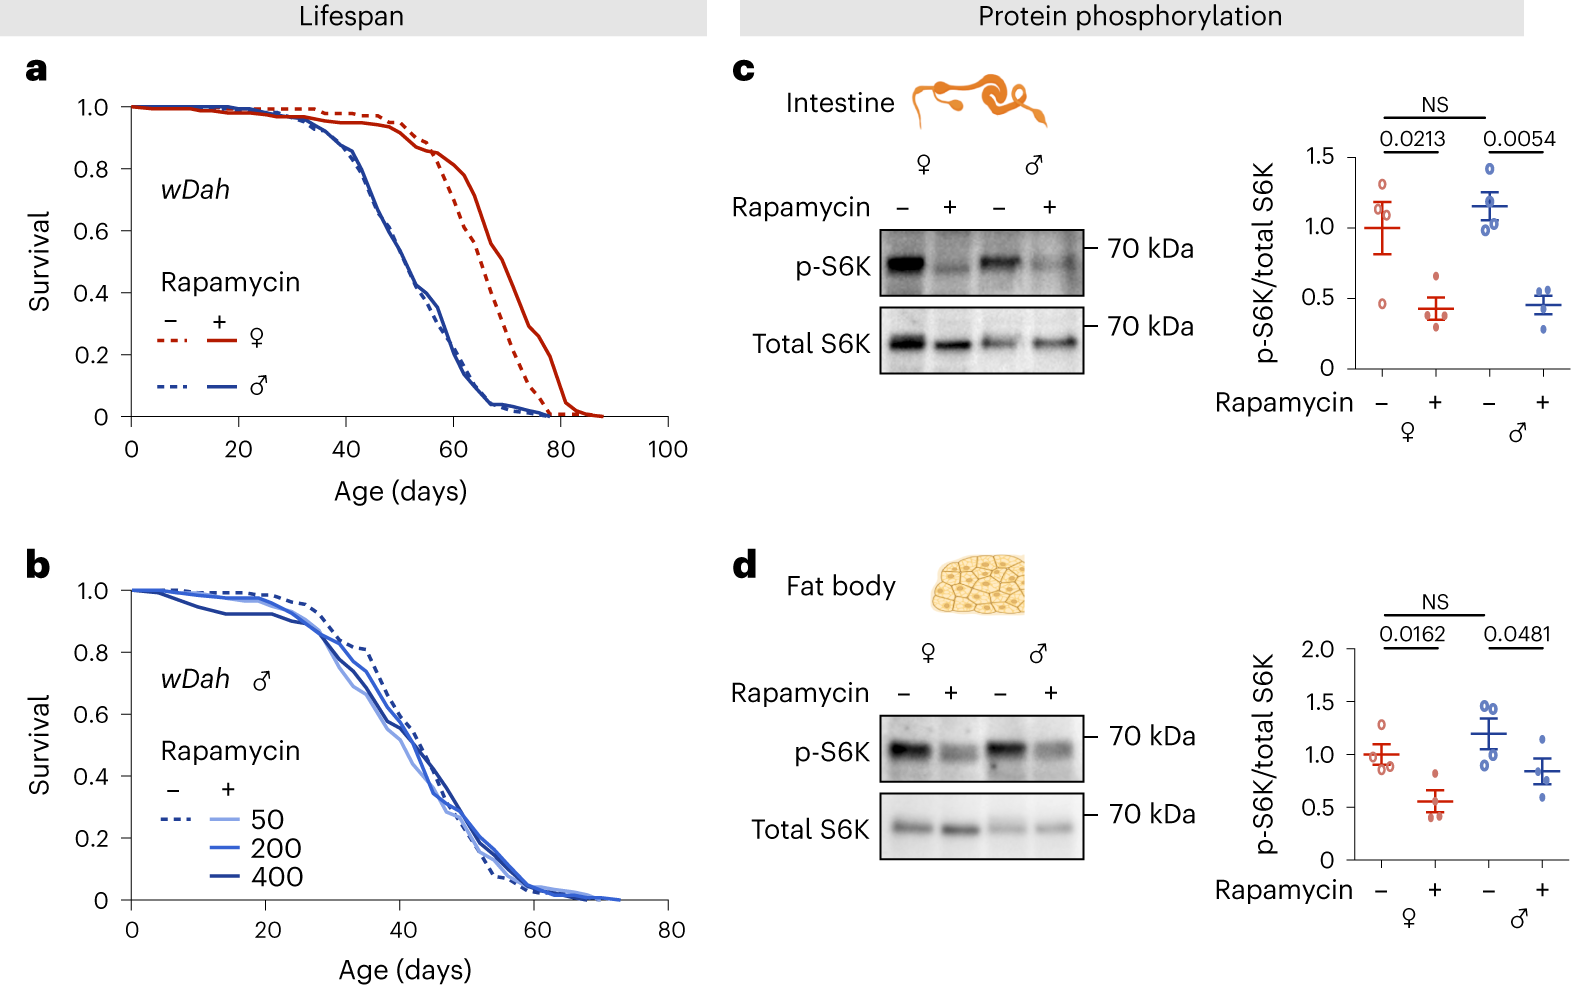 Sexual identity of enterocytes regulates autophagy to determine intestinal health, lifespan and responses to rapamycin Nature Aging